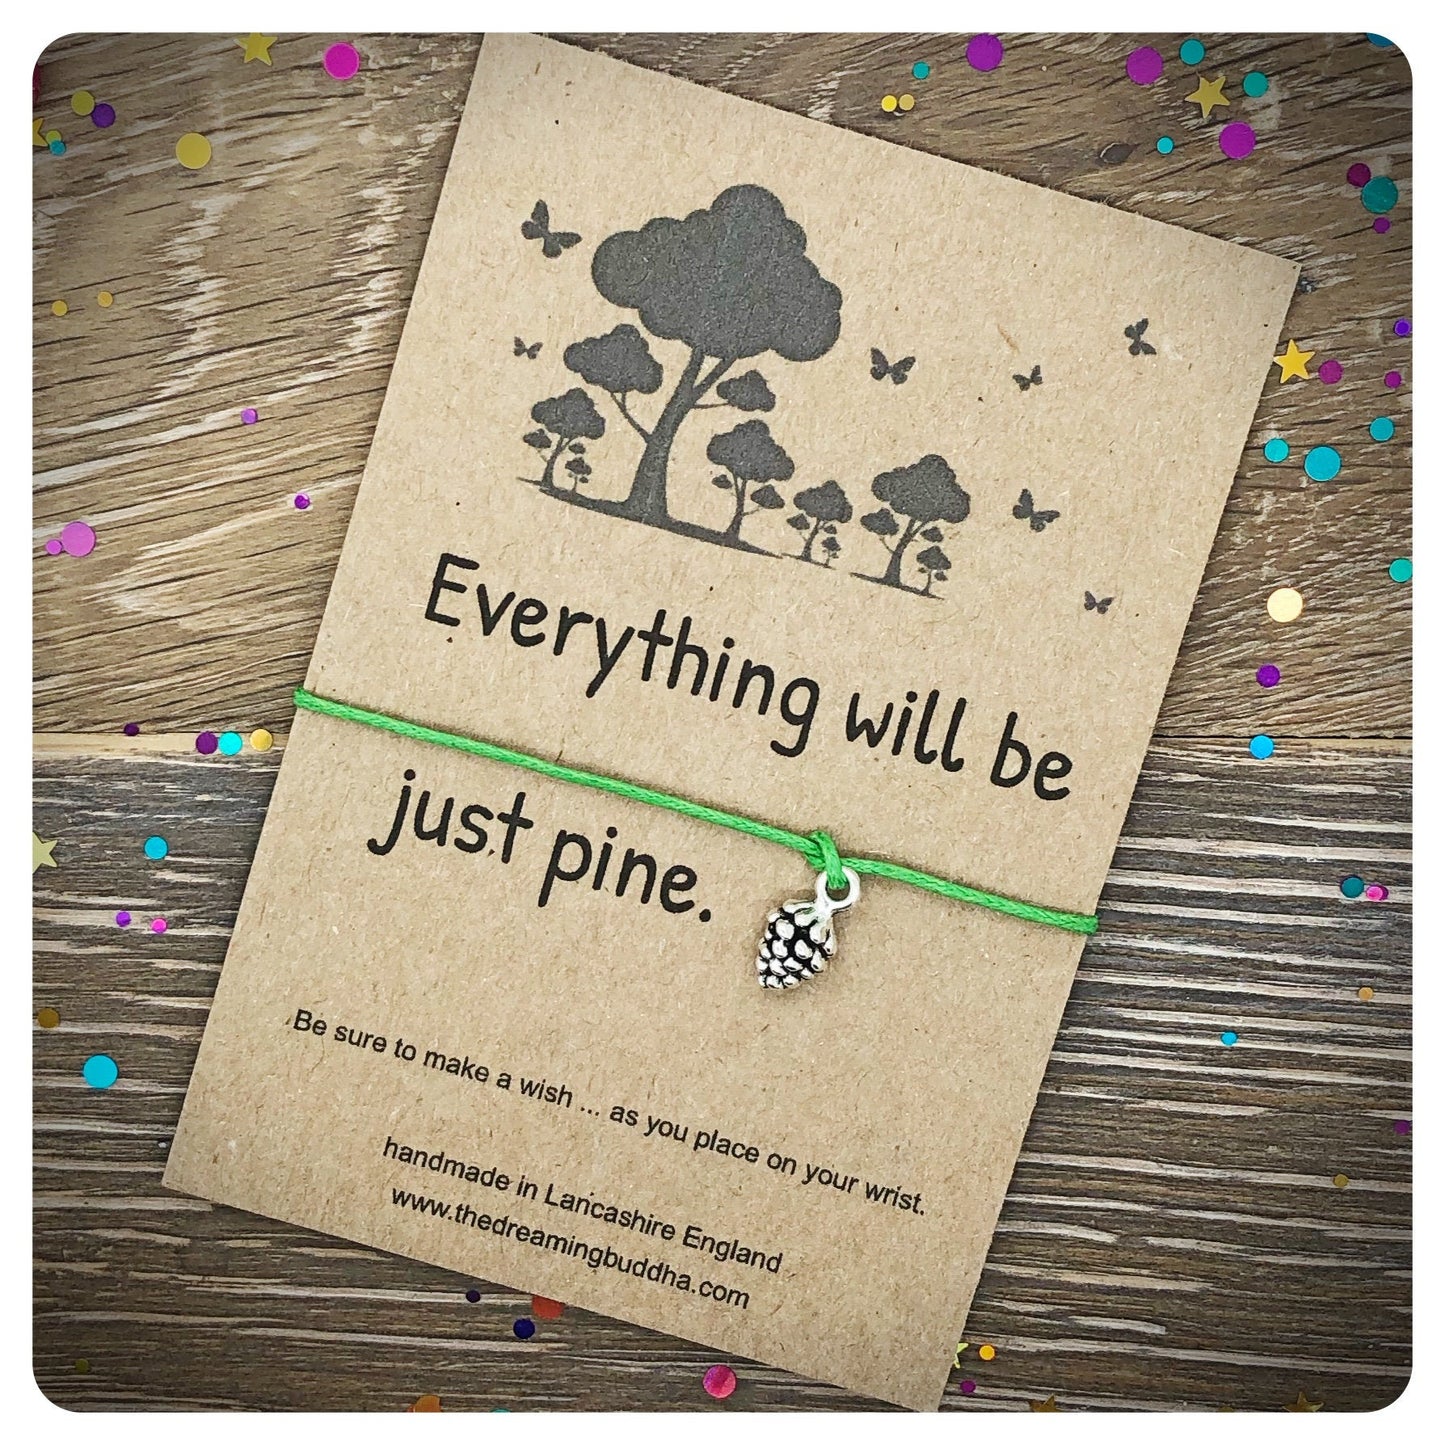 Reassurance Gift, Everything Will Be Pine Wish Bracelet, Pine Cone Jewellery, Funny Pun Card For Friends and Family